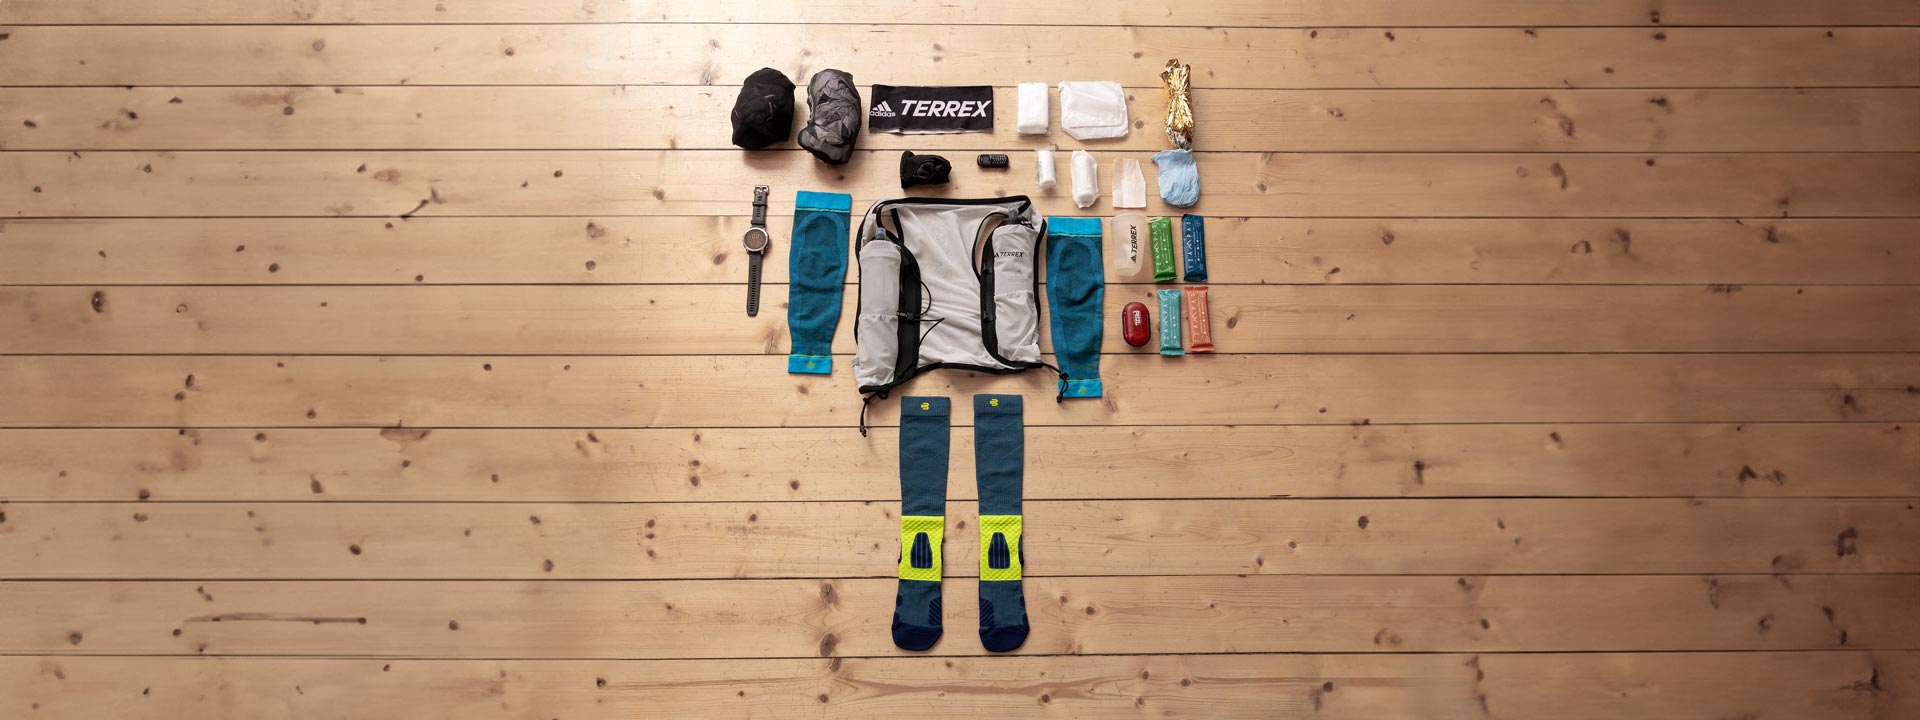 Necessary trail run equipment is flat on a wooden floor.